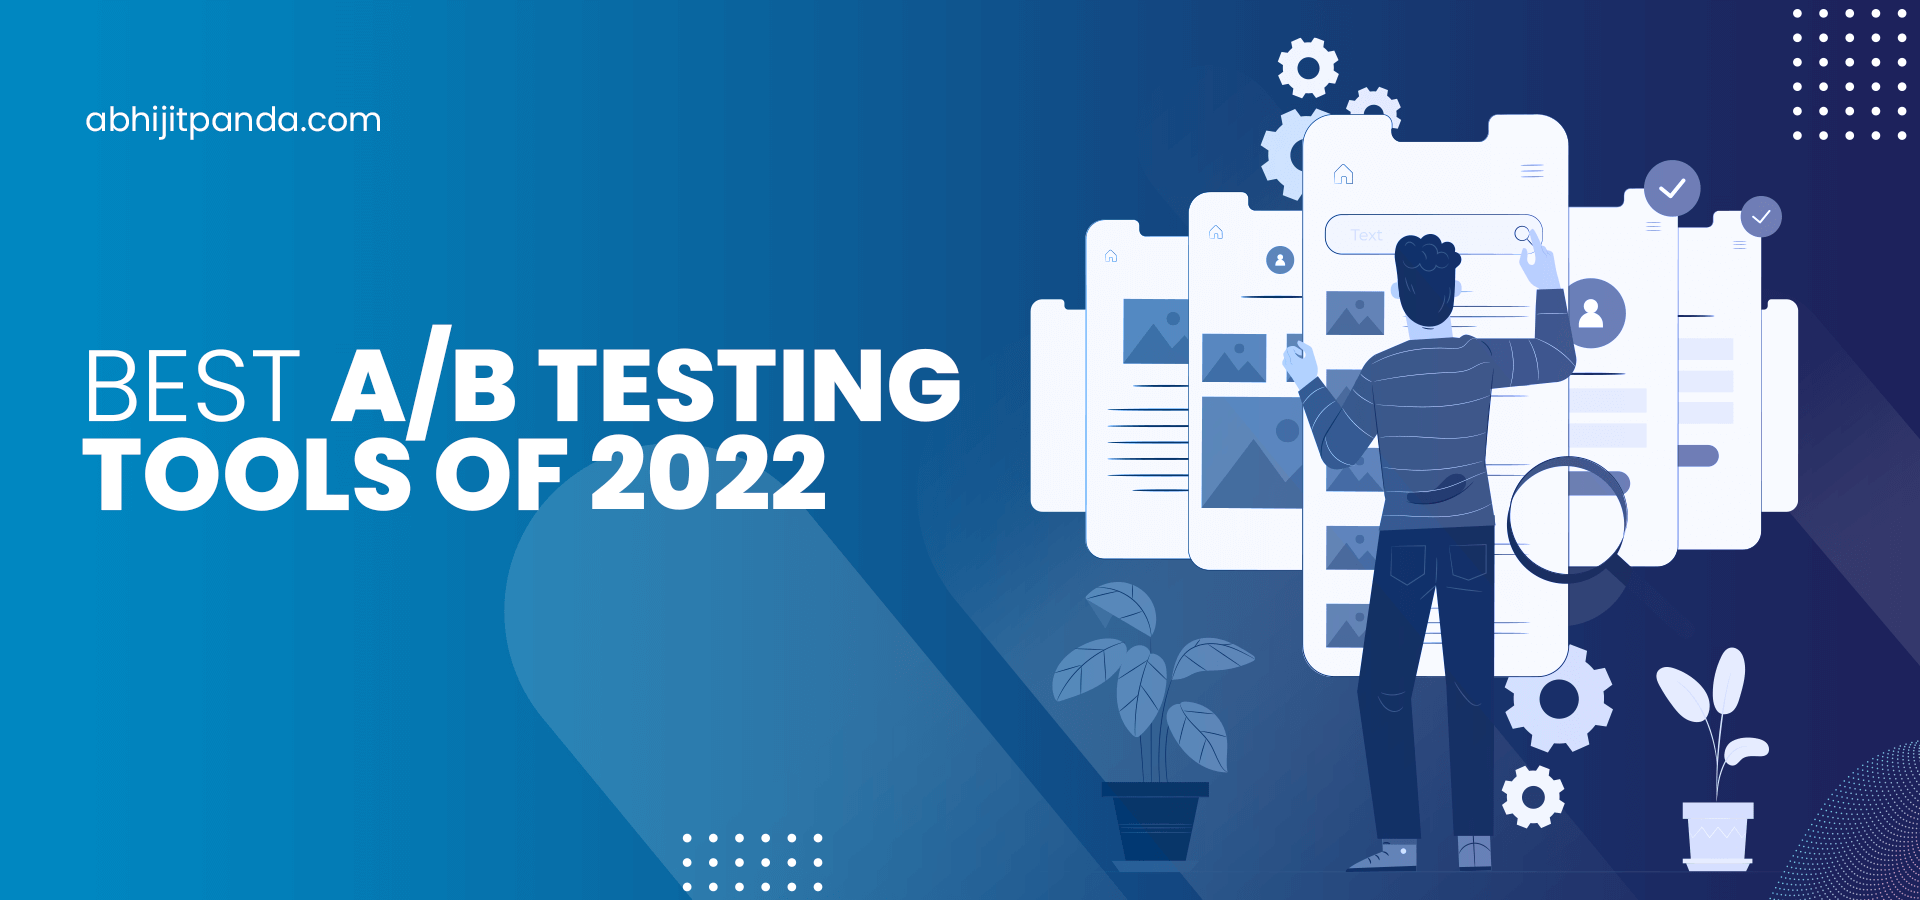 Best A-B Testing Tools of 2022